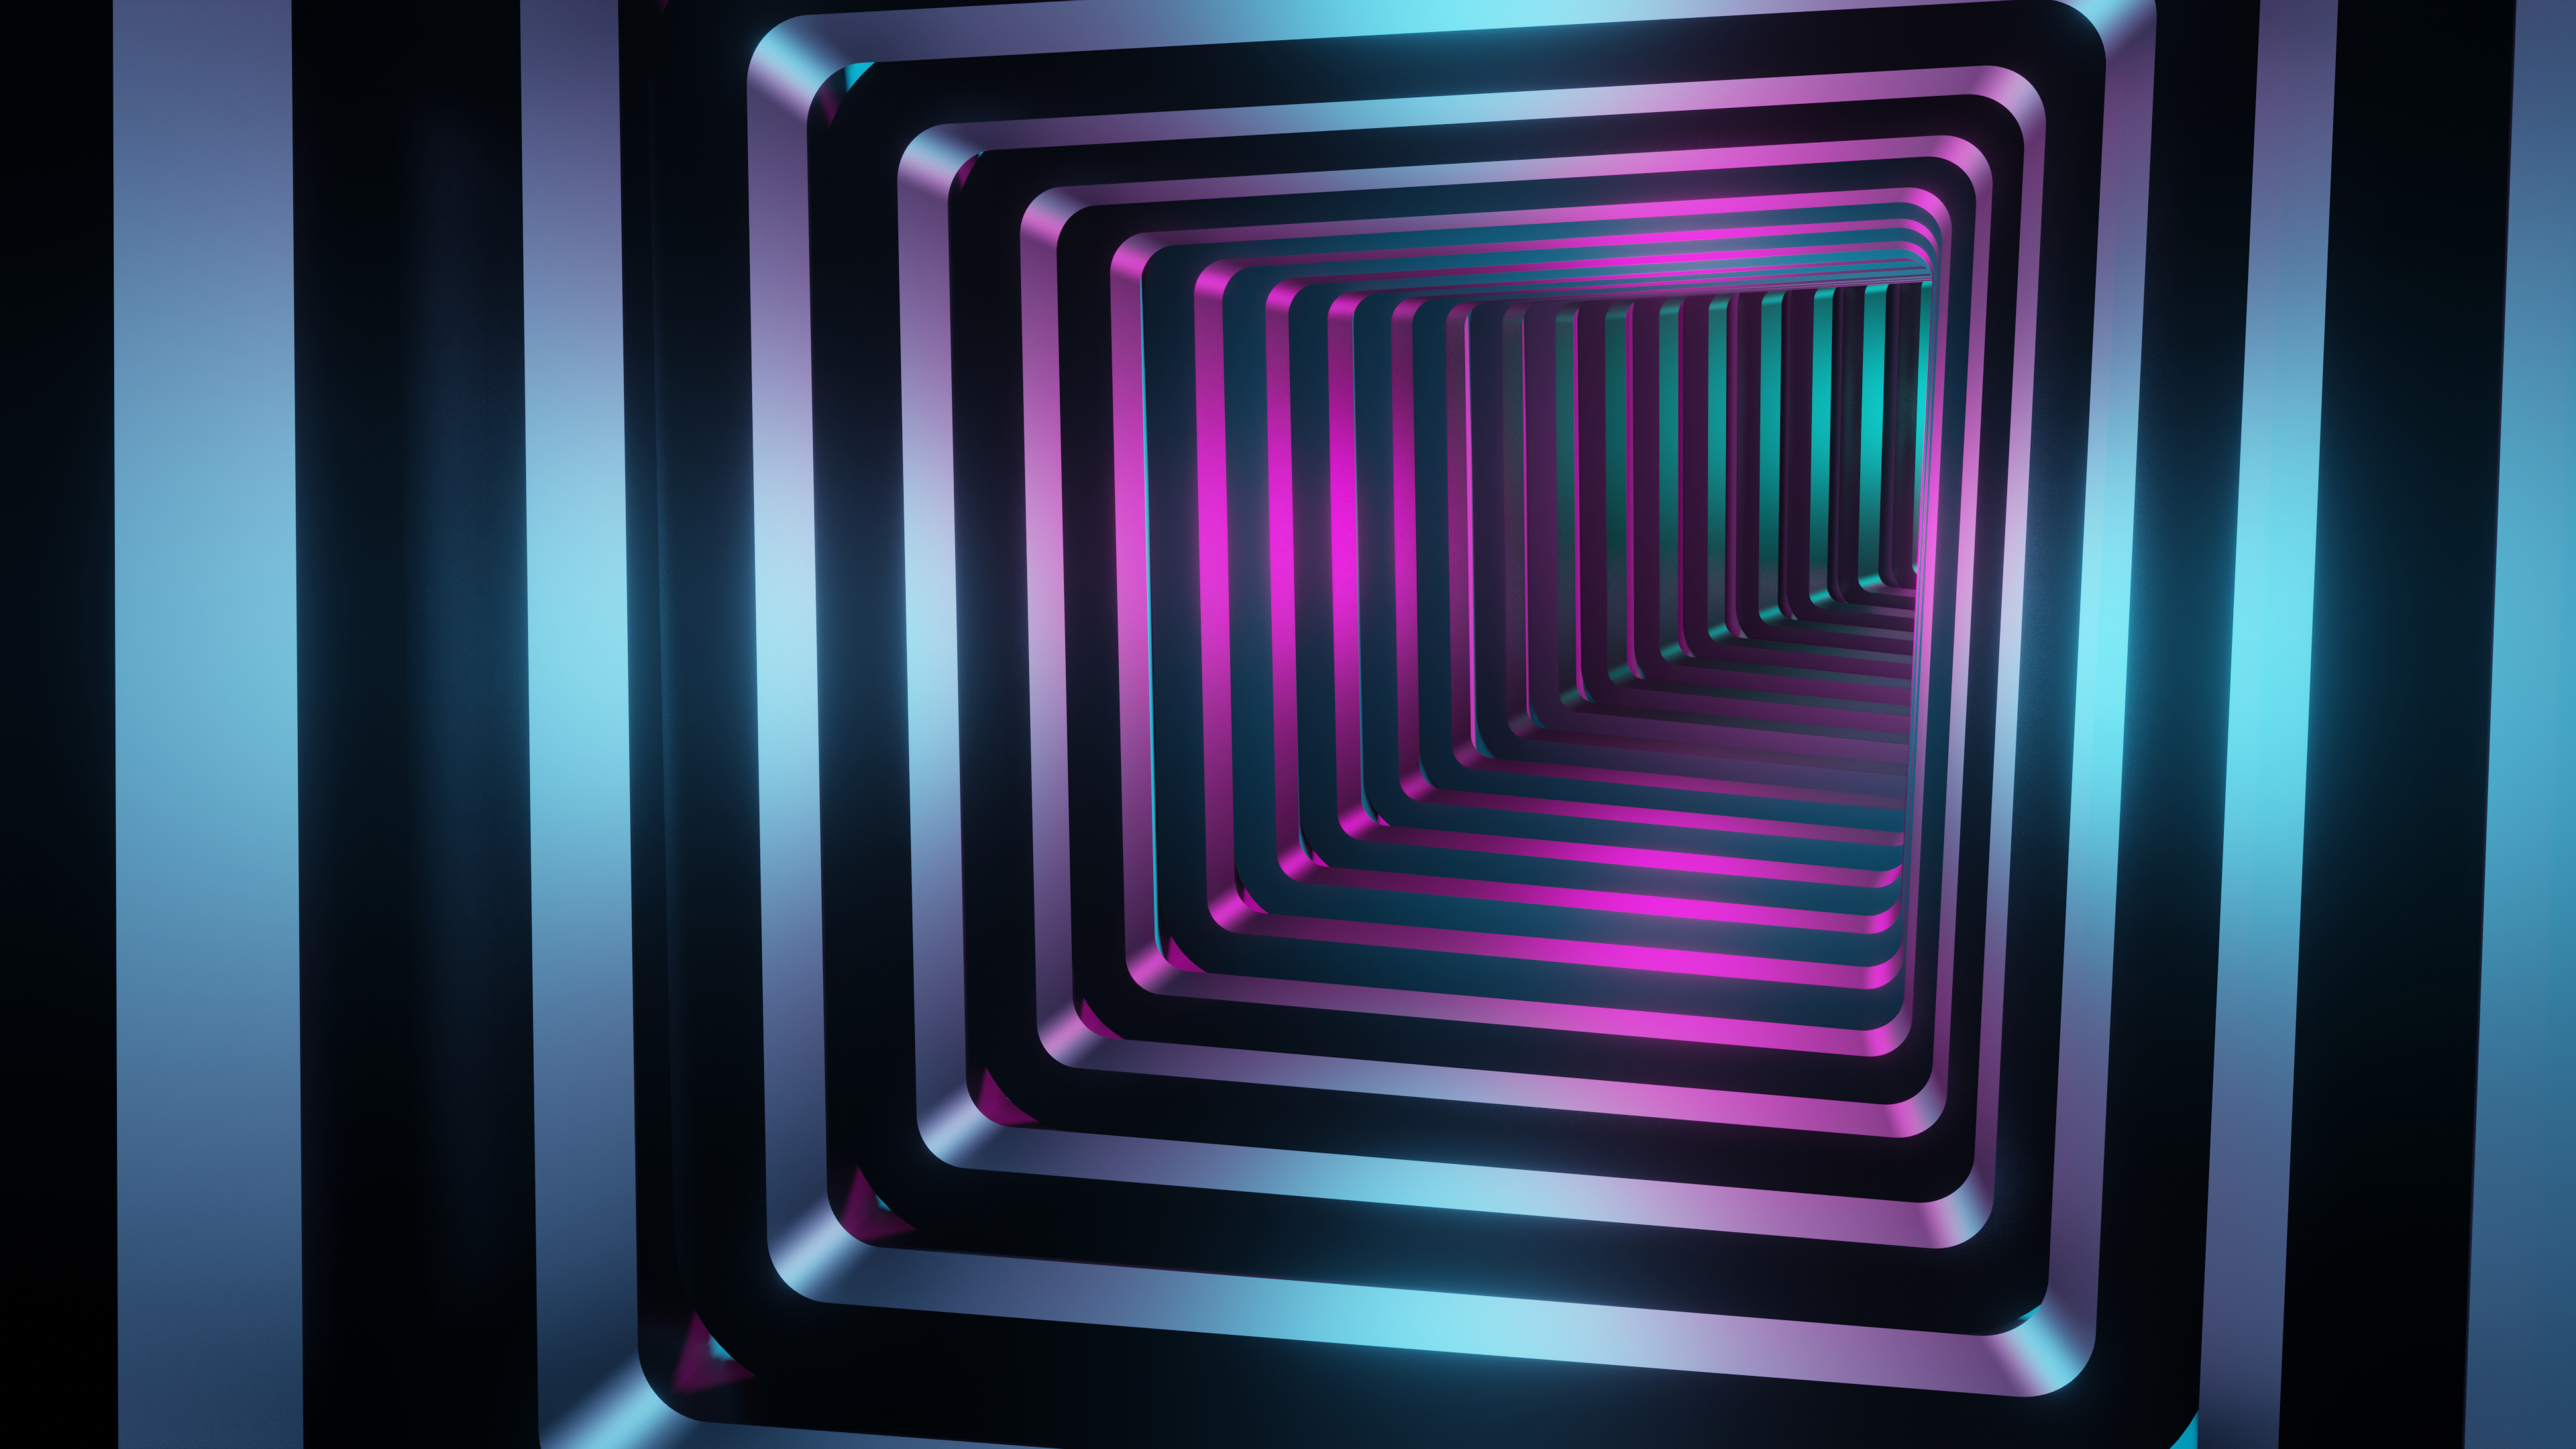 1024x600 Square 3d Tunnel 1024x600 Resolution Wallpaper Hd Abstract 4k ...